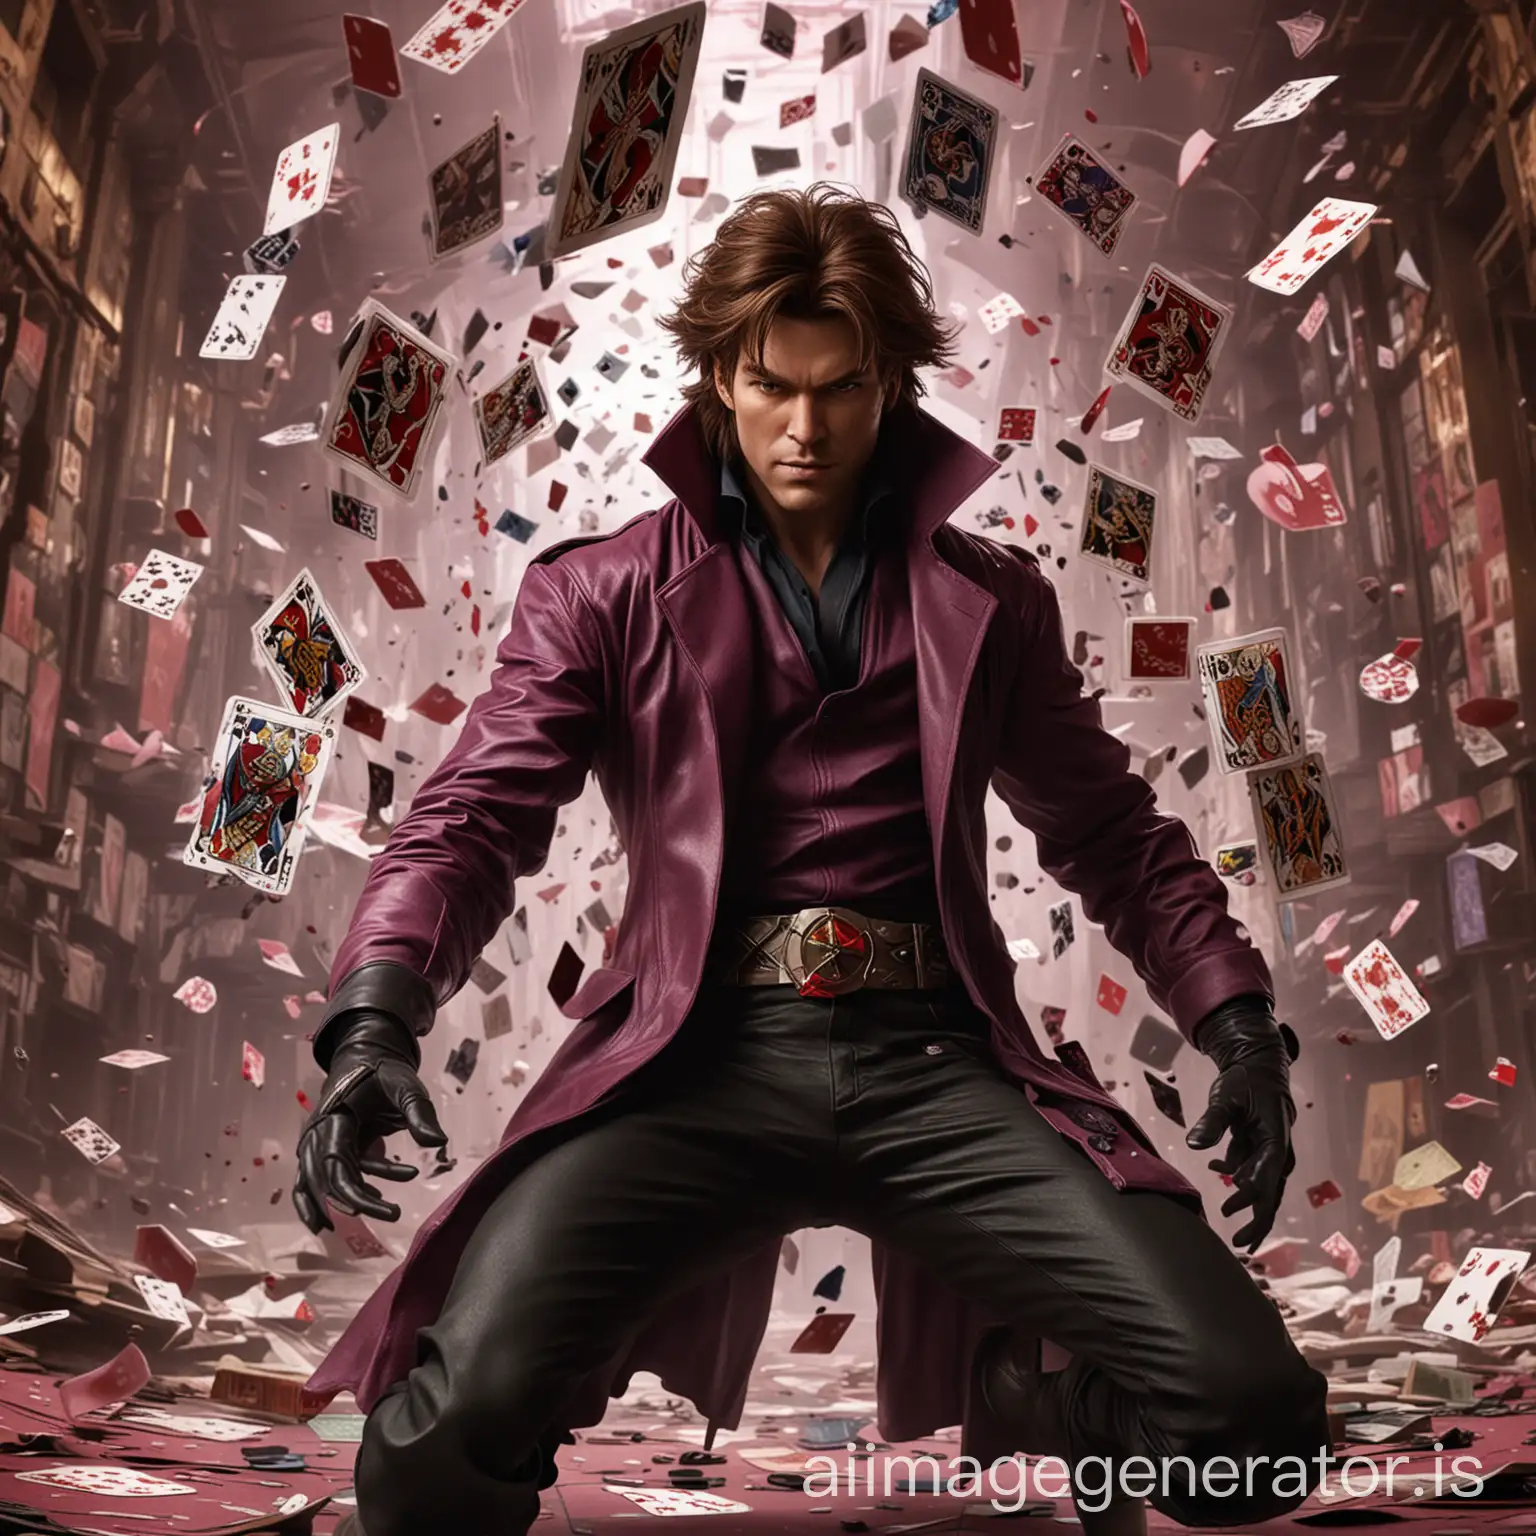 Gambit-XMen-Character-Surrounded-by-Suspended-Playing-Cards